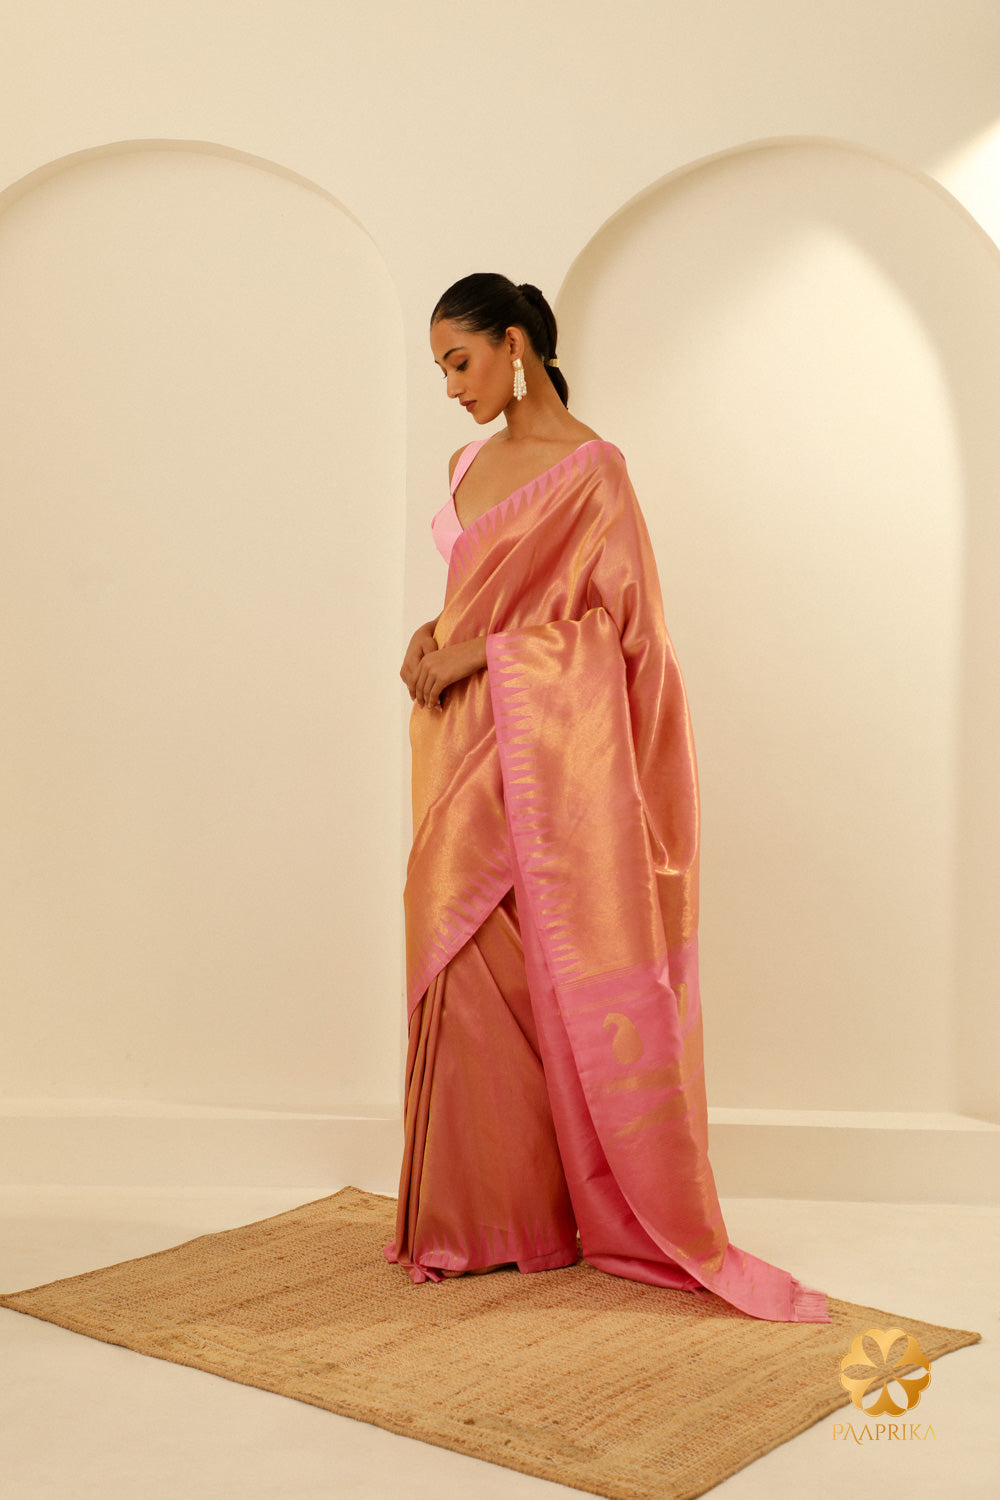 The saree elegantly draped on a mannequin, showcasing its cultural richness and craftsmanship.